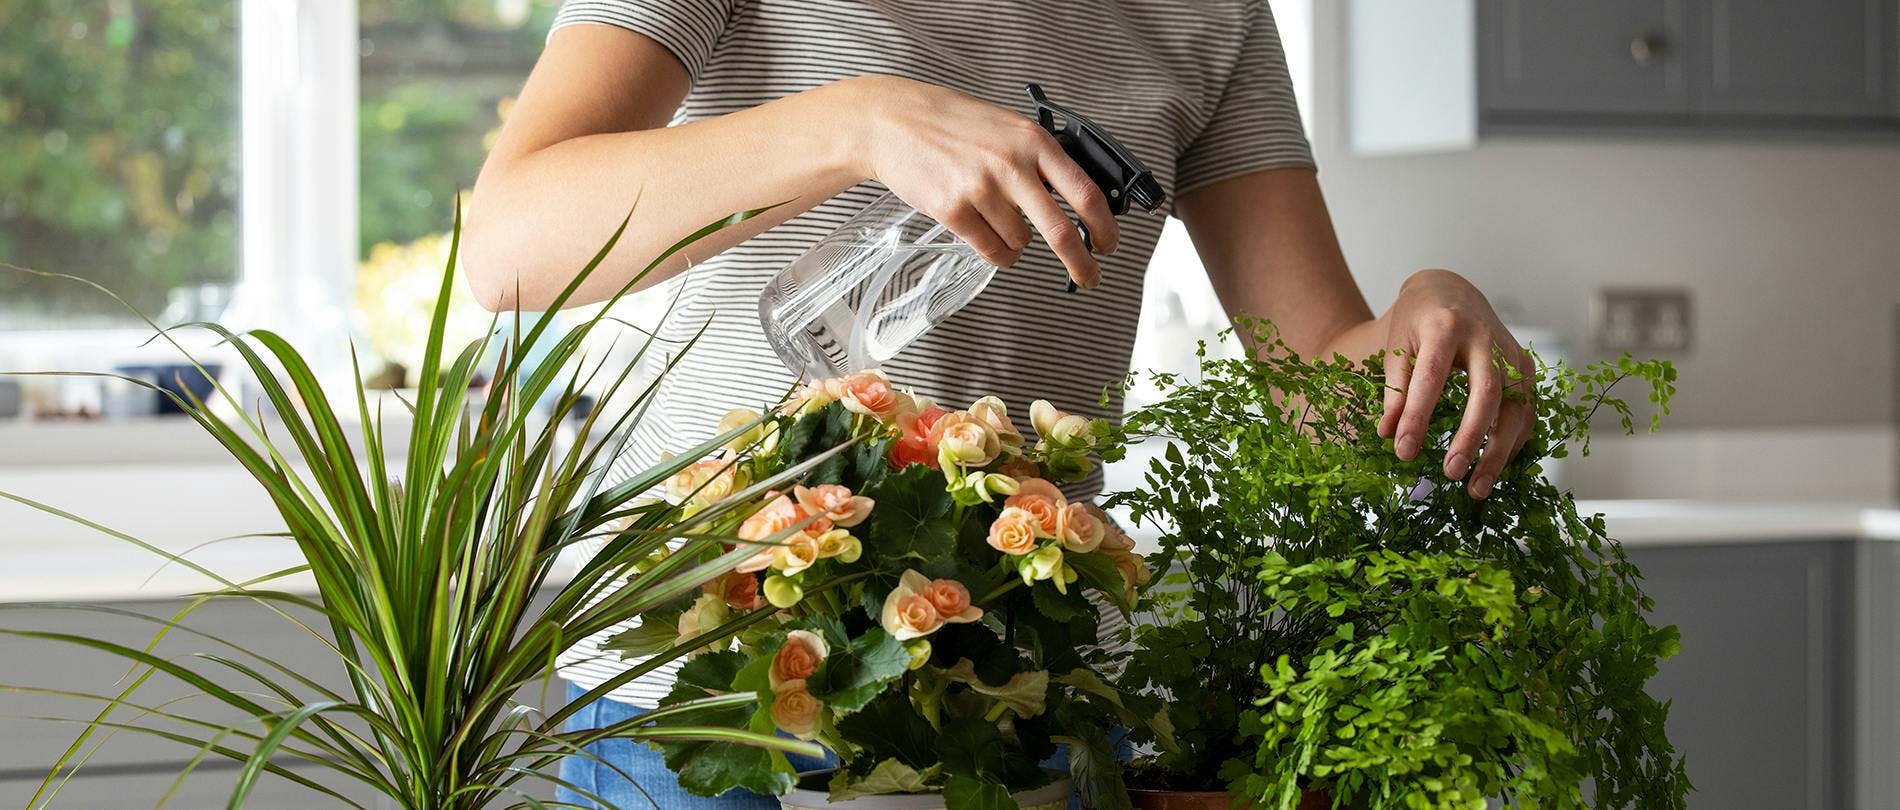 Why Should I Use Filtered Water for Plants?